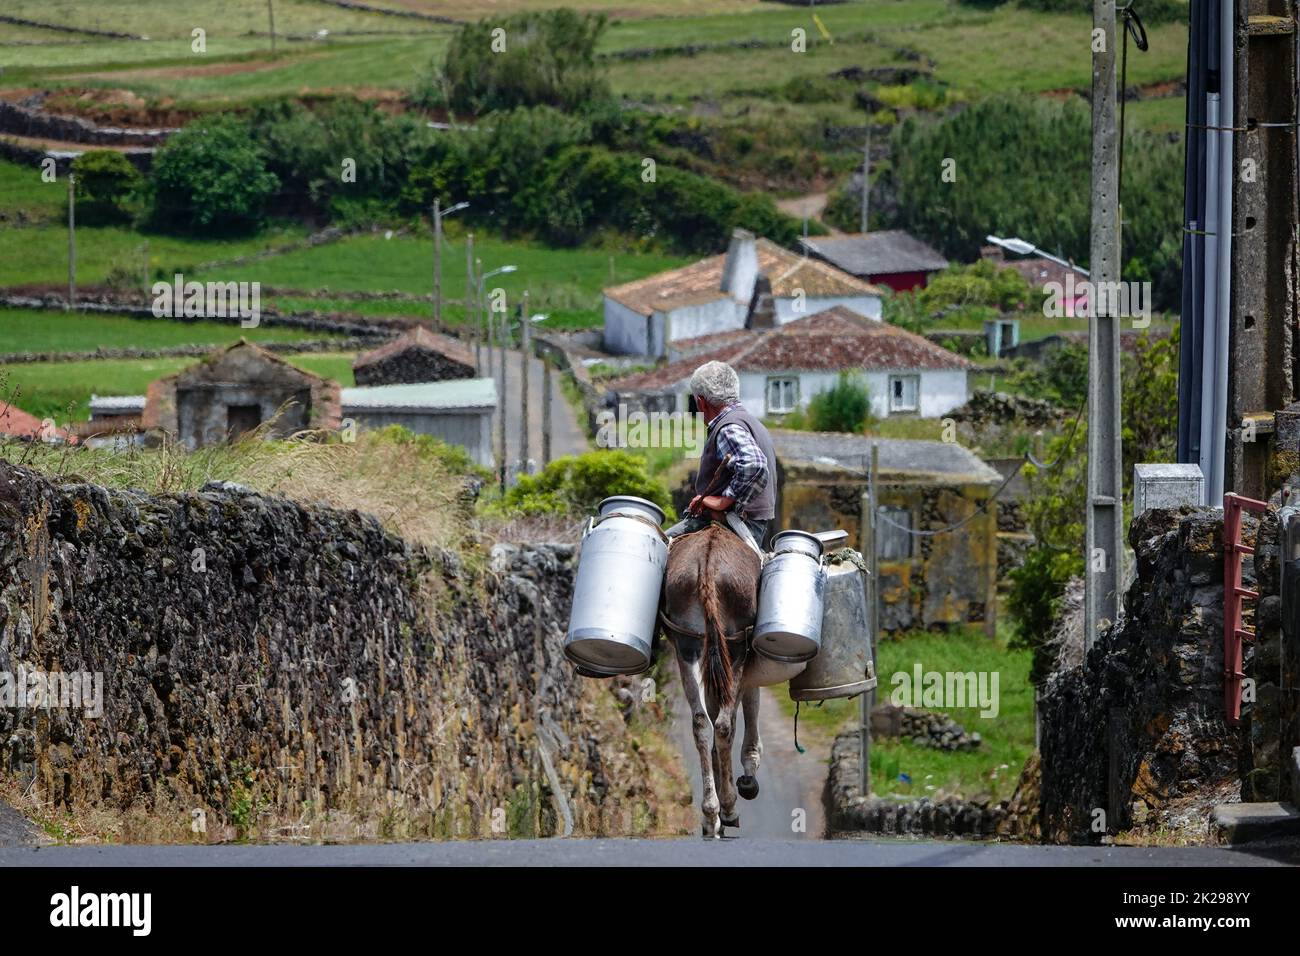 Dairy farmer carrying milk cans on a donkey to a storage site in Villa Nova, Terceira Island, Azores, Portugal. The Azores are known as the land of the happy cows and produce 30% of all dairy production in Portugal. Stock Photo